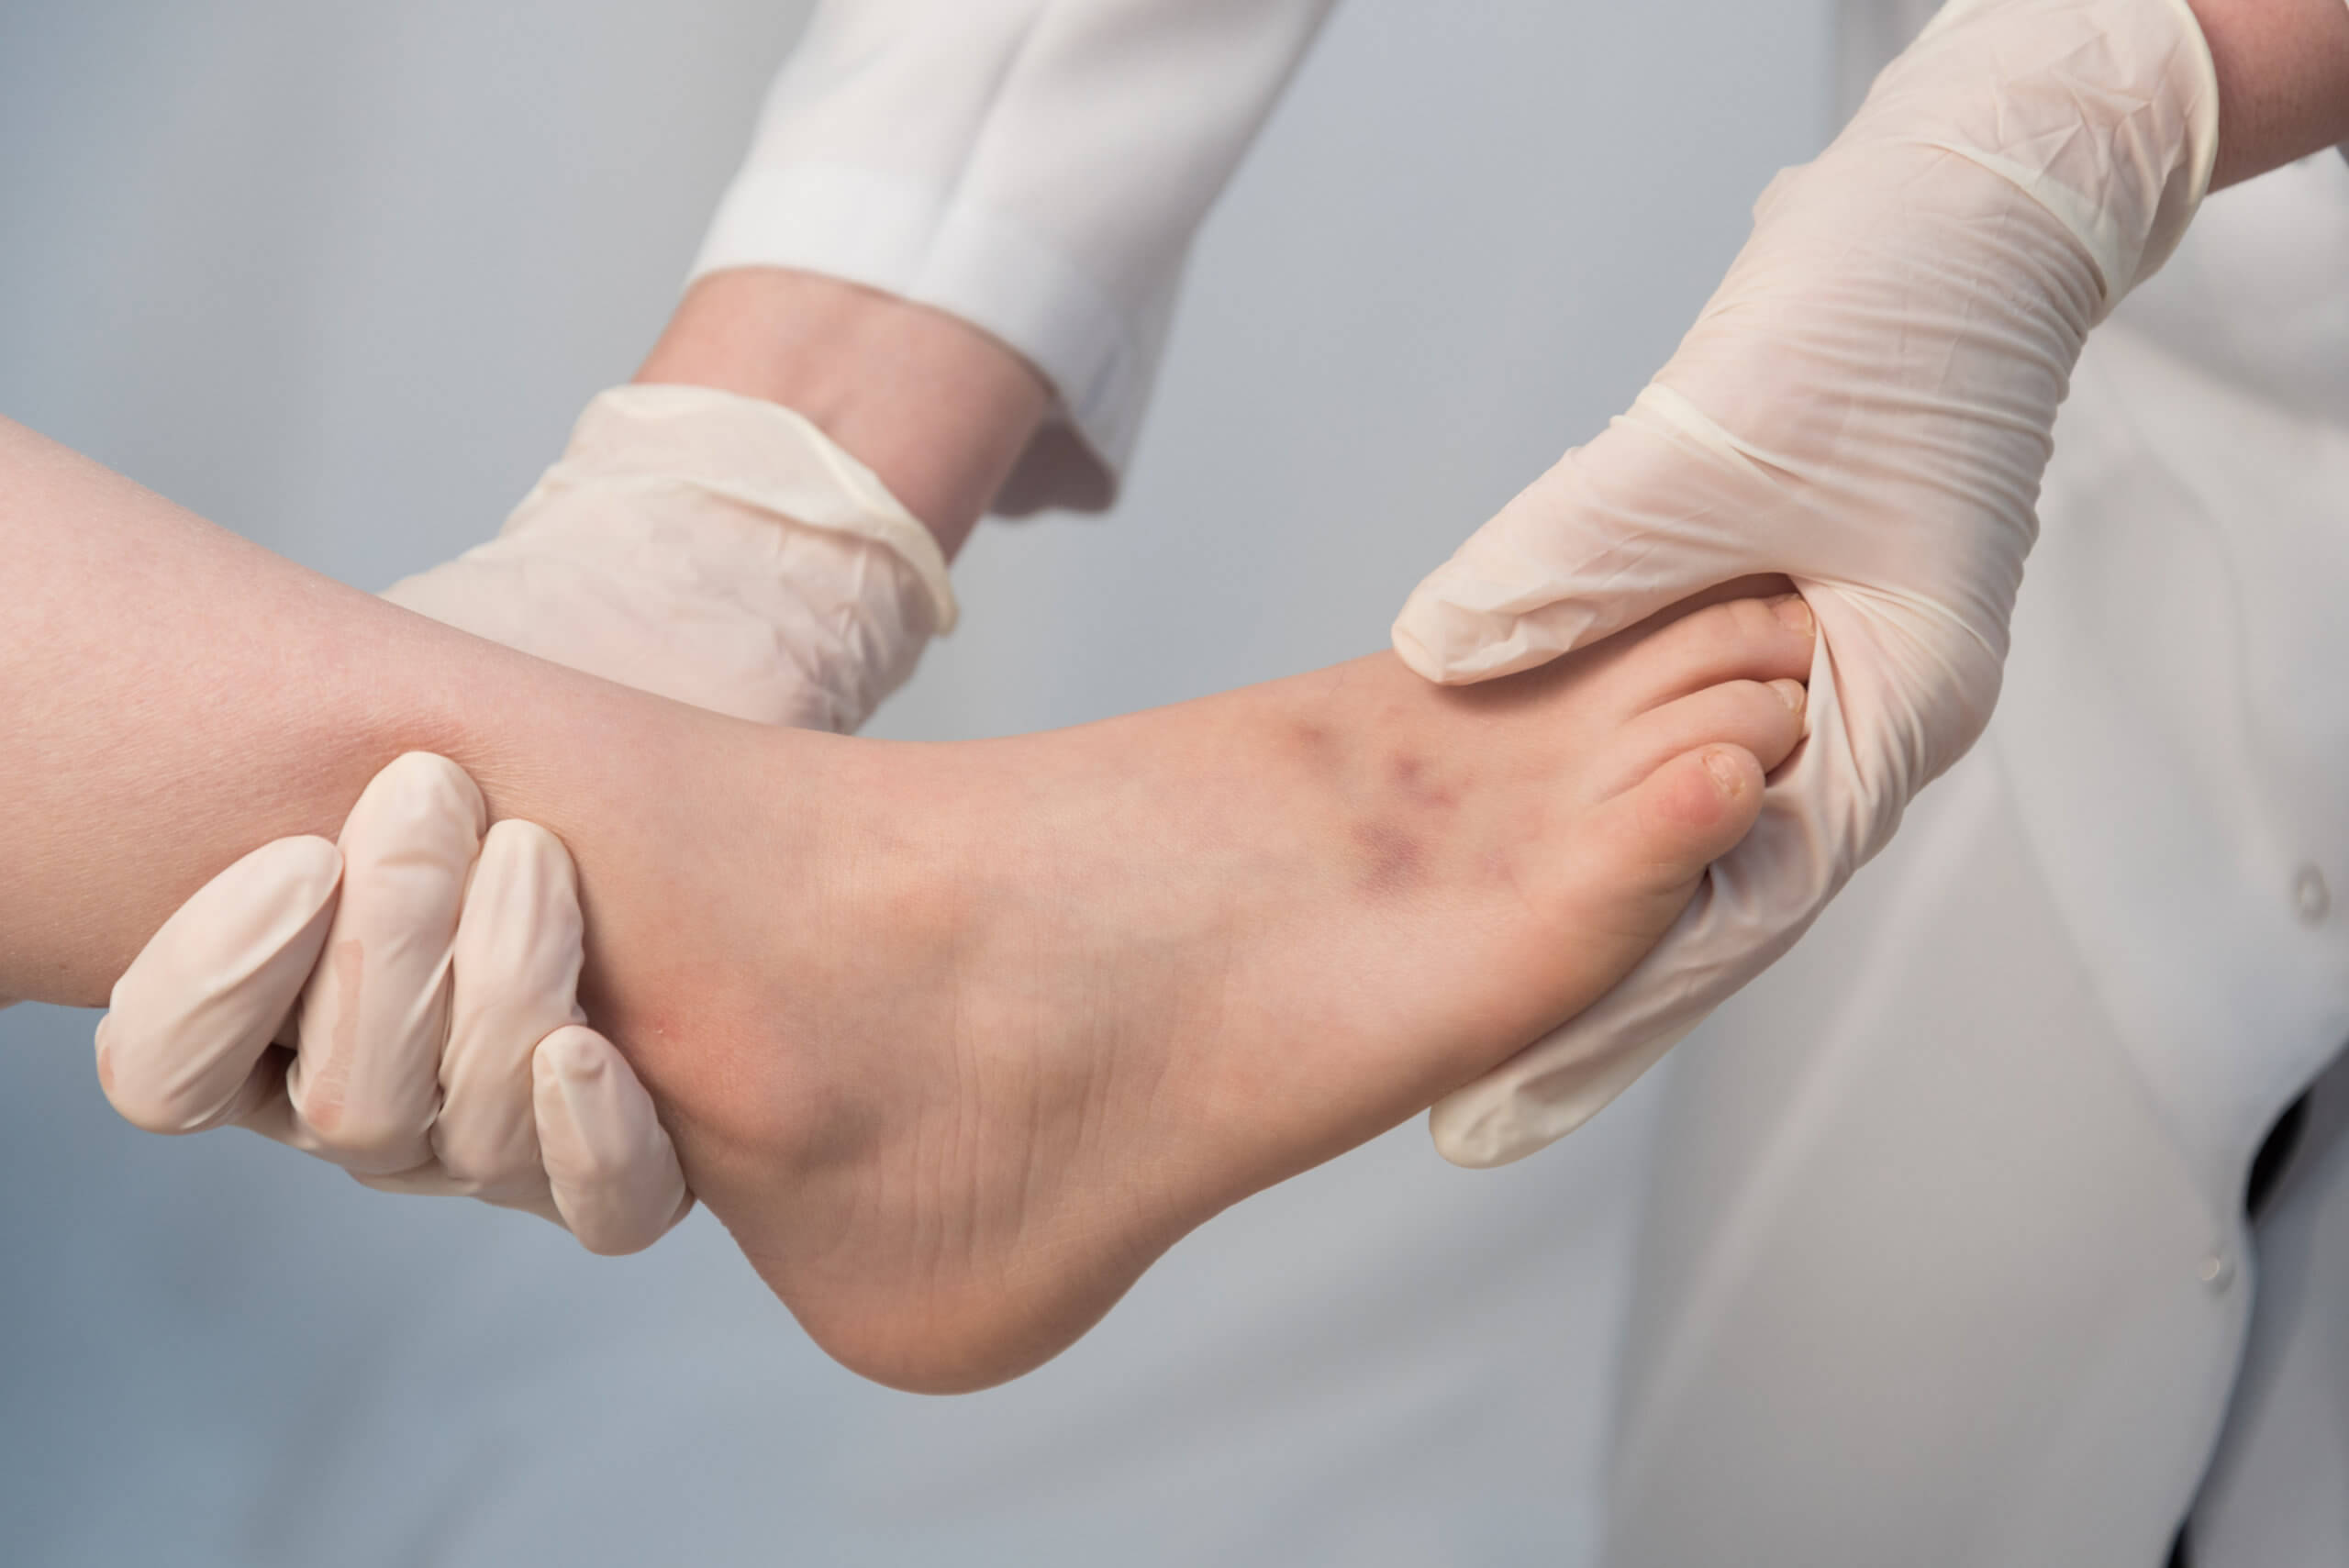 A doctor wears gloves while examining a foot with visible bruising.